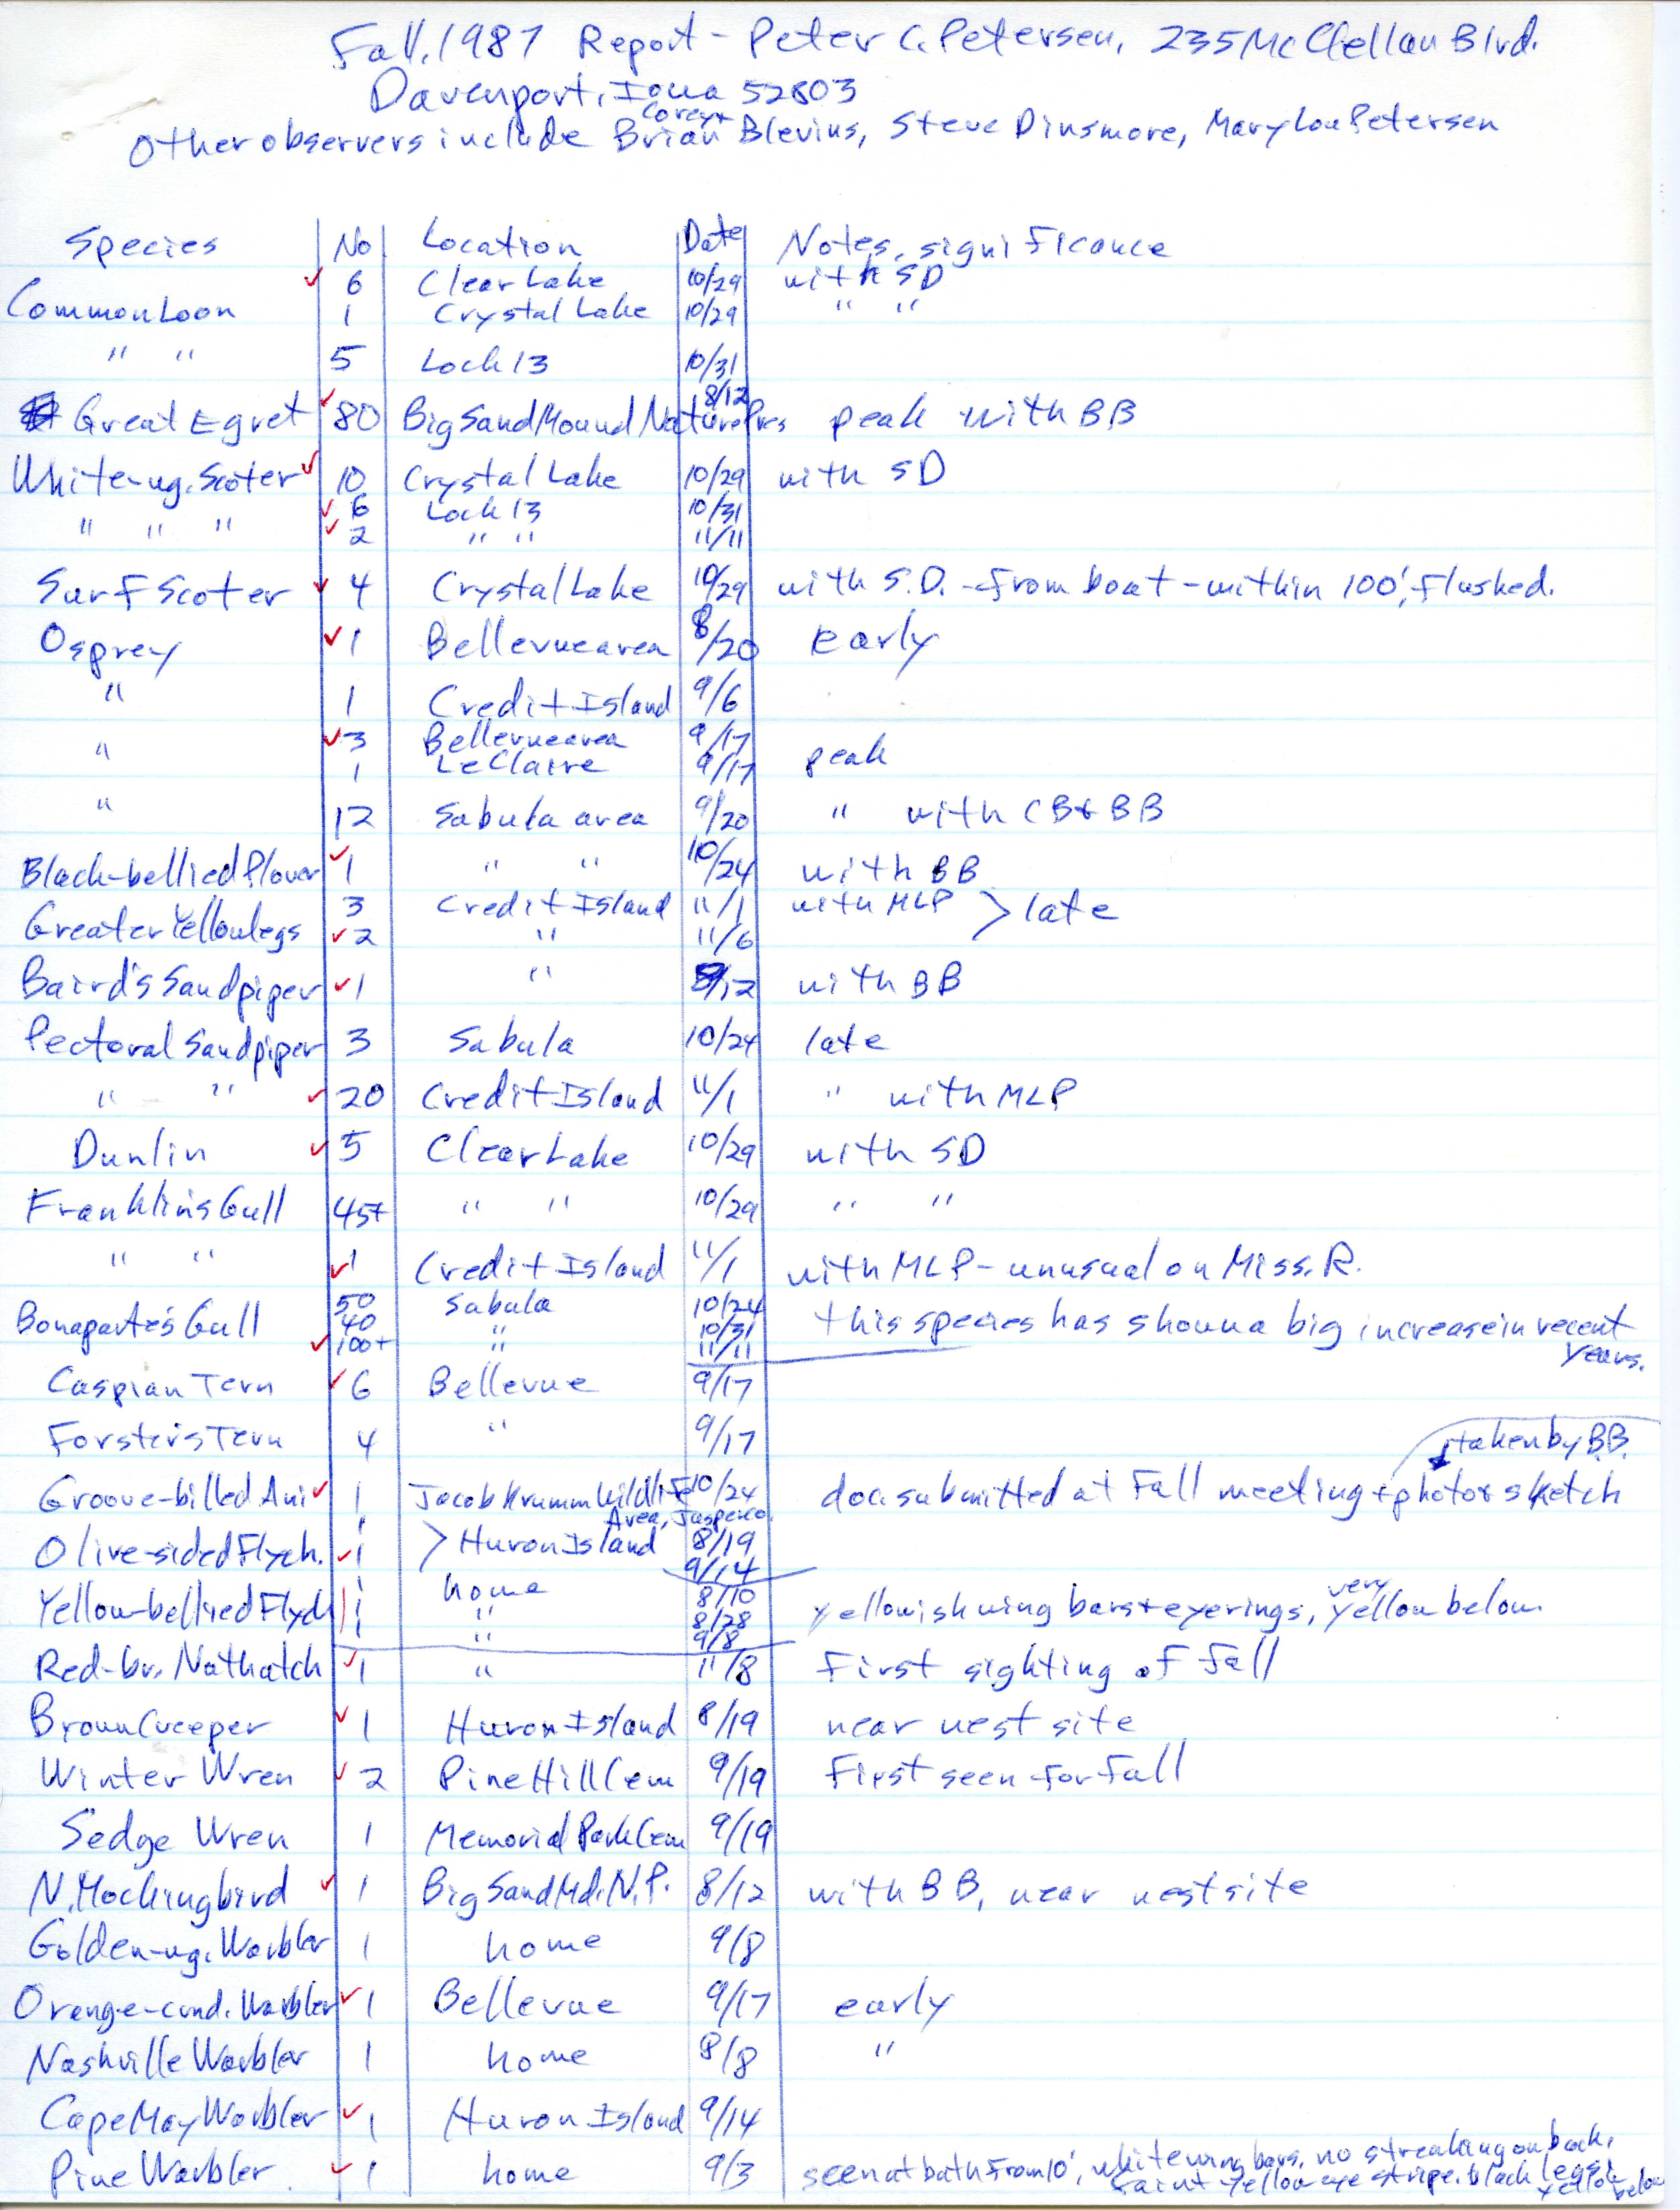 Field notes contributed by Peter C. Petersen, fall 1987